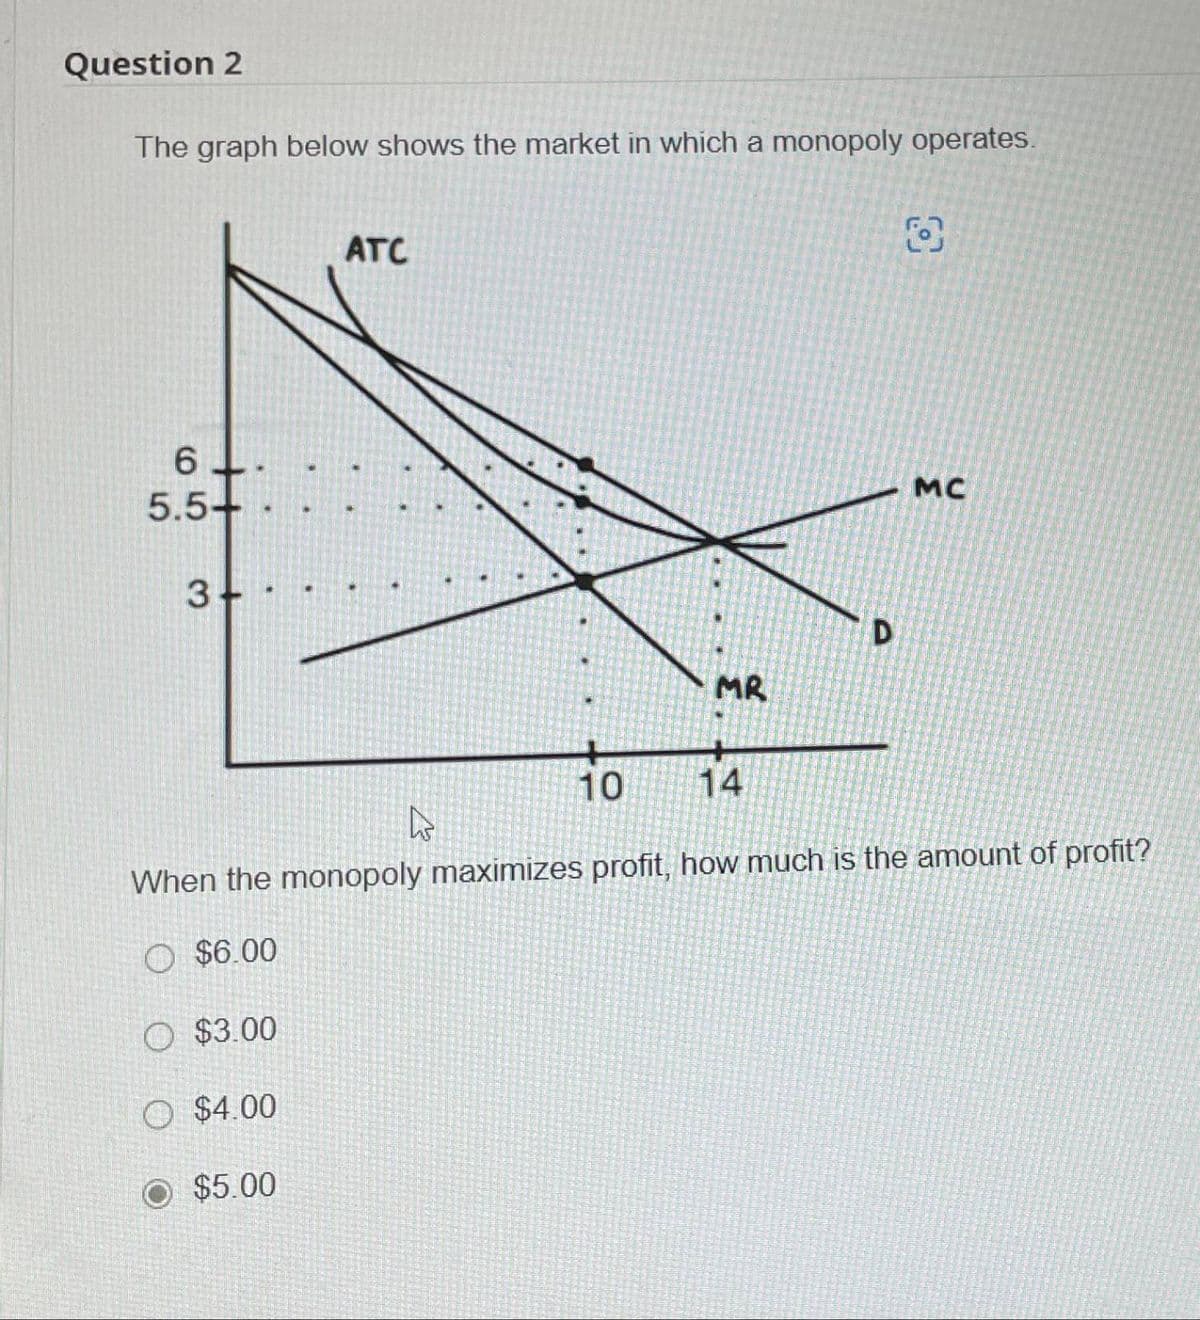 Question 2
The graph below shows the market in which a monopoly operates.
6.
5.5-
3
ATC
D
MR
10
14
B
MC
When the monopoly maximizes profit, how much is the amount of profit?
O $6.00
$3.00
$4.00
$5.00